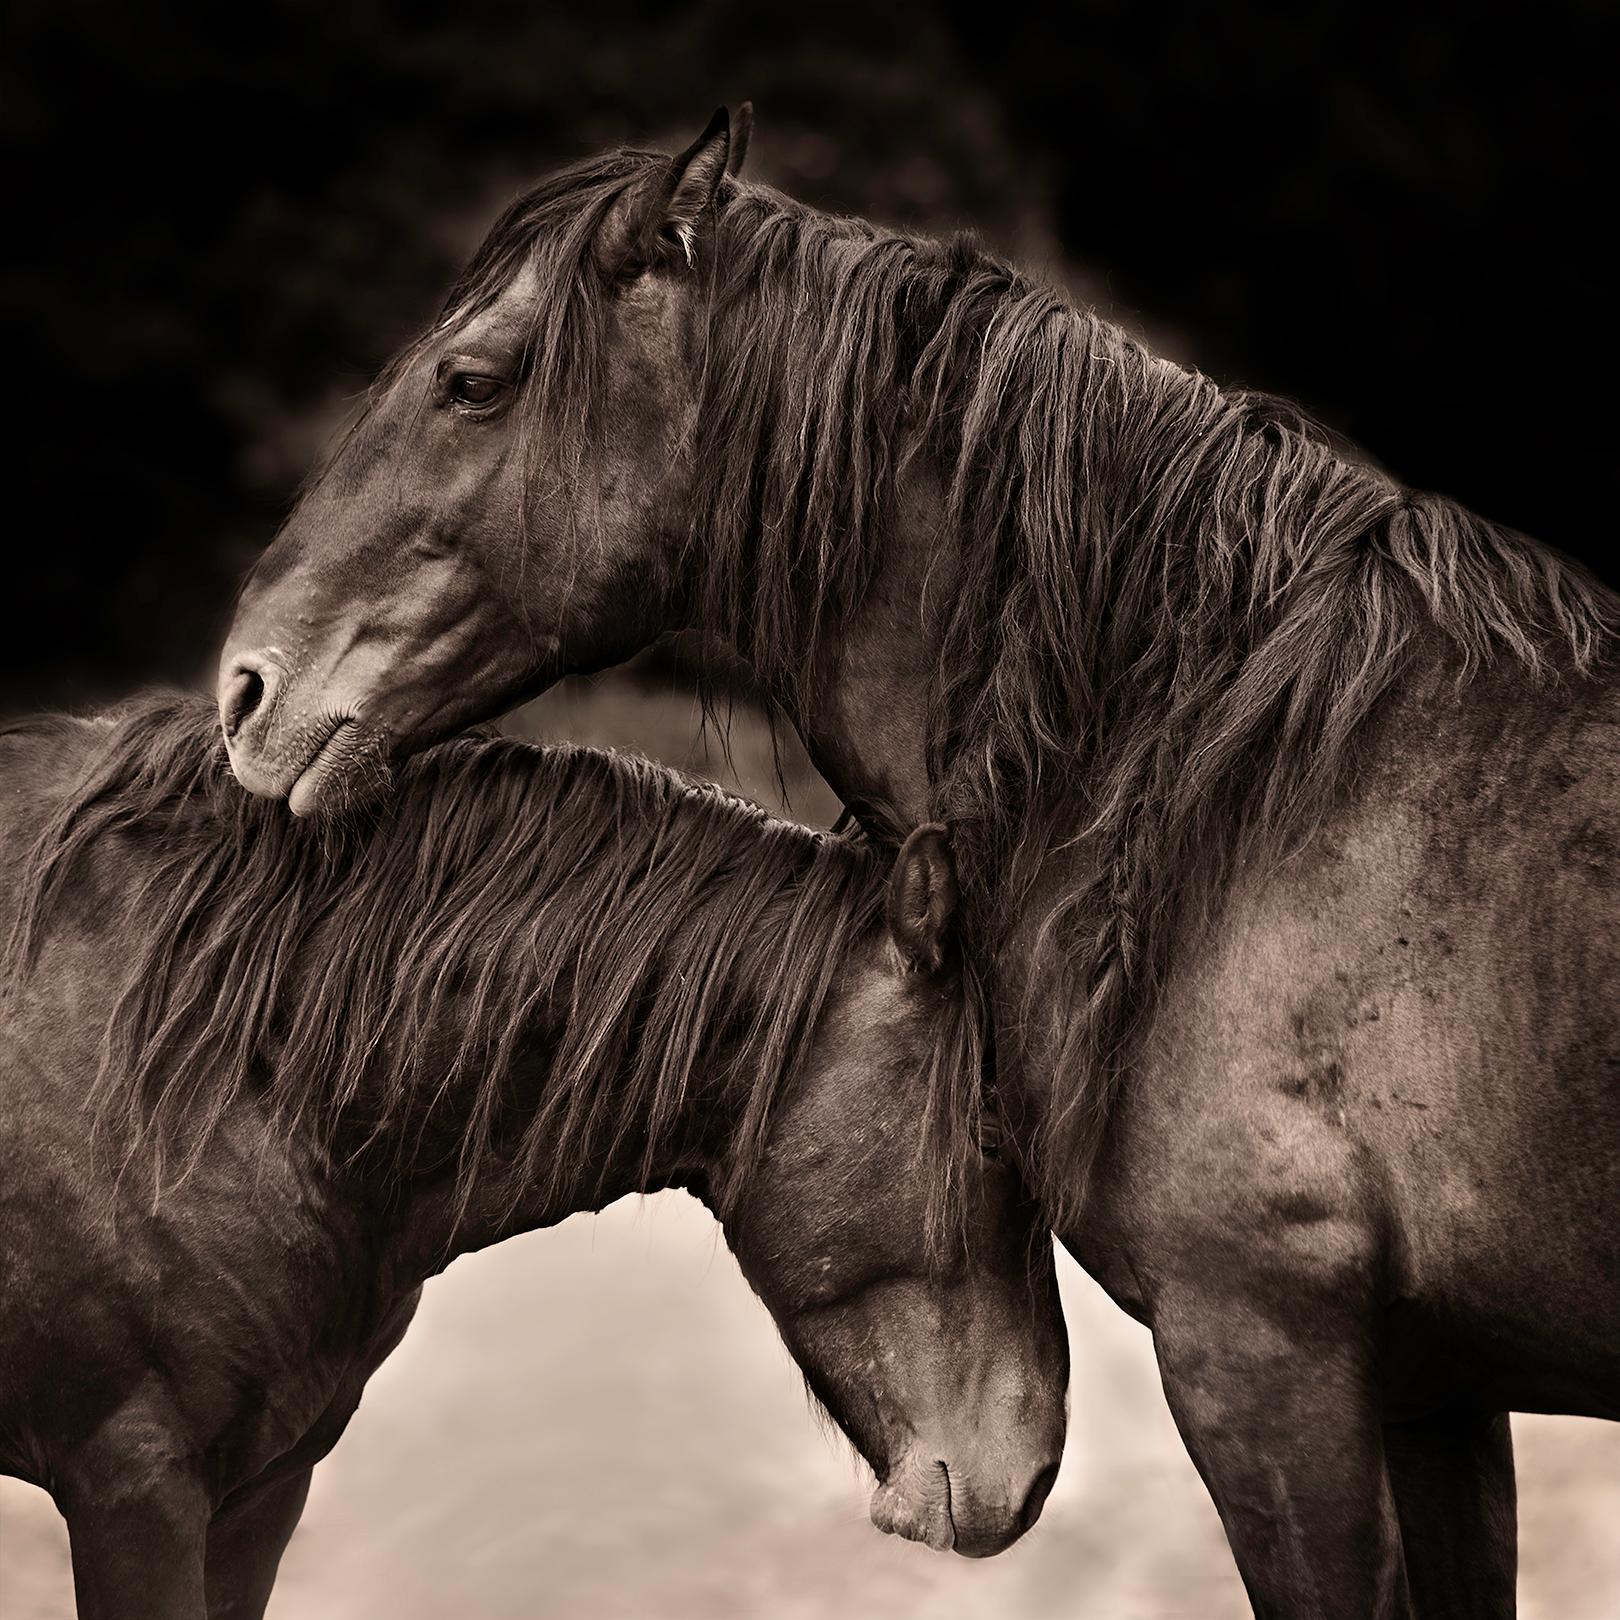 Tori Gagne Black and White Photograph - "Seeking Solace II" Contemporary Wild Horse Photograph, 24" x 24"